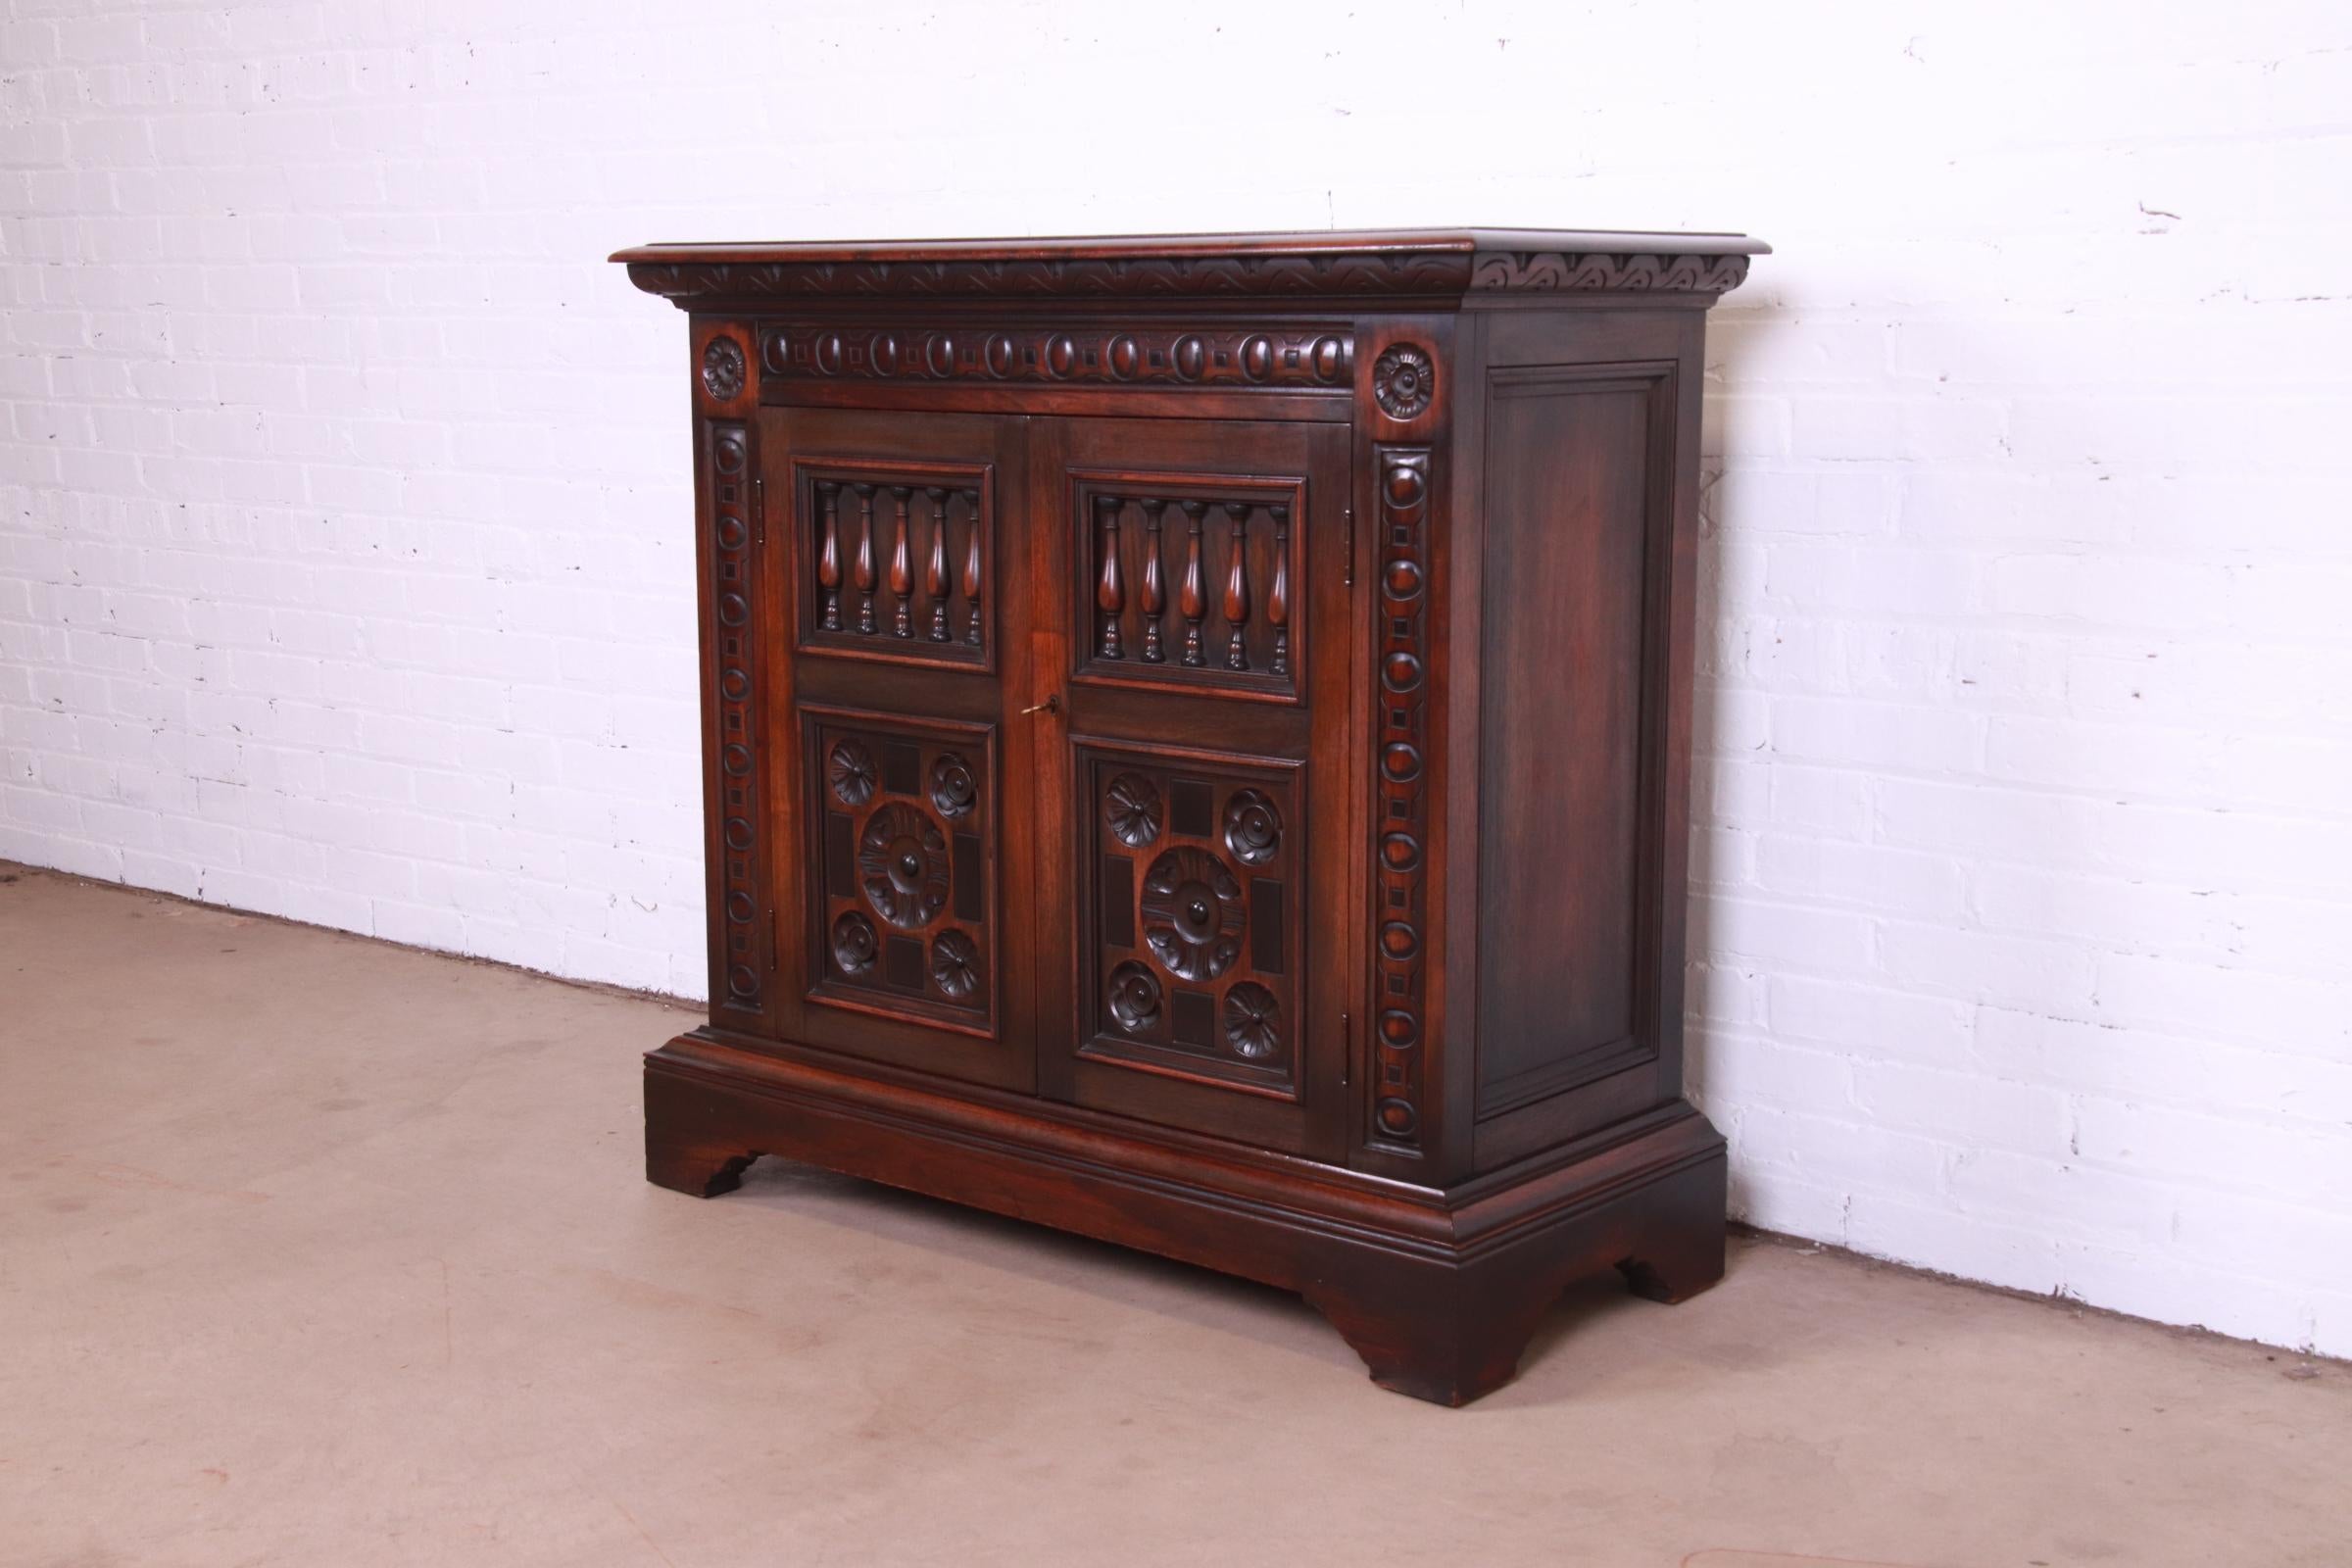 20th Century Kittinger Spanish Baroque Carved Walnut Server or Bar Cabinet, Circa 1920s For Sale